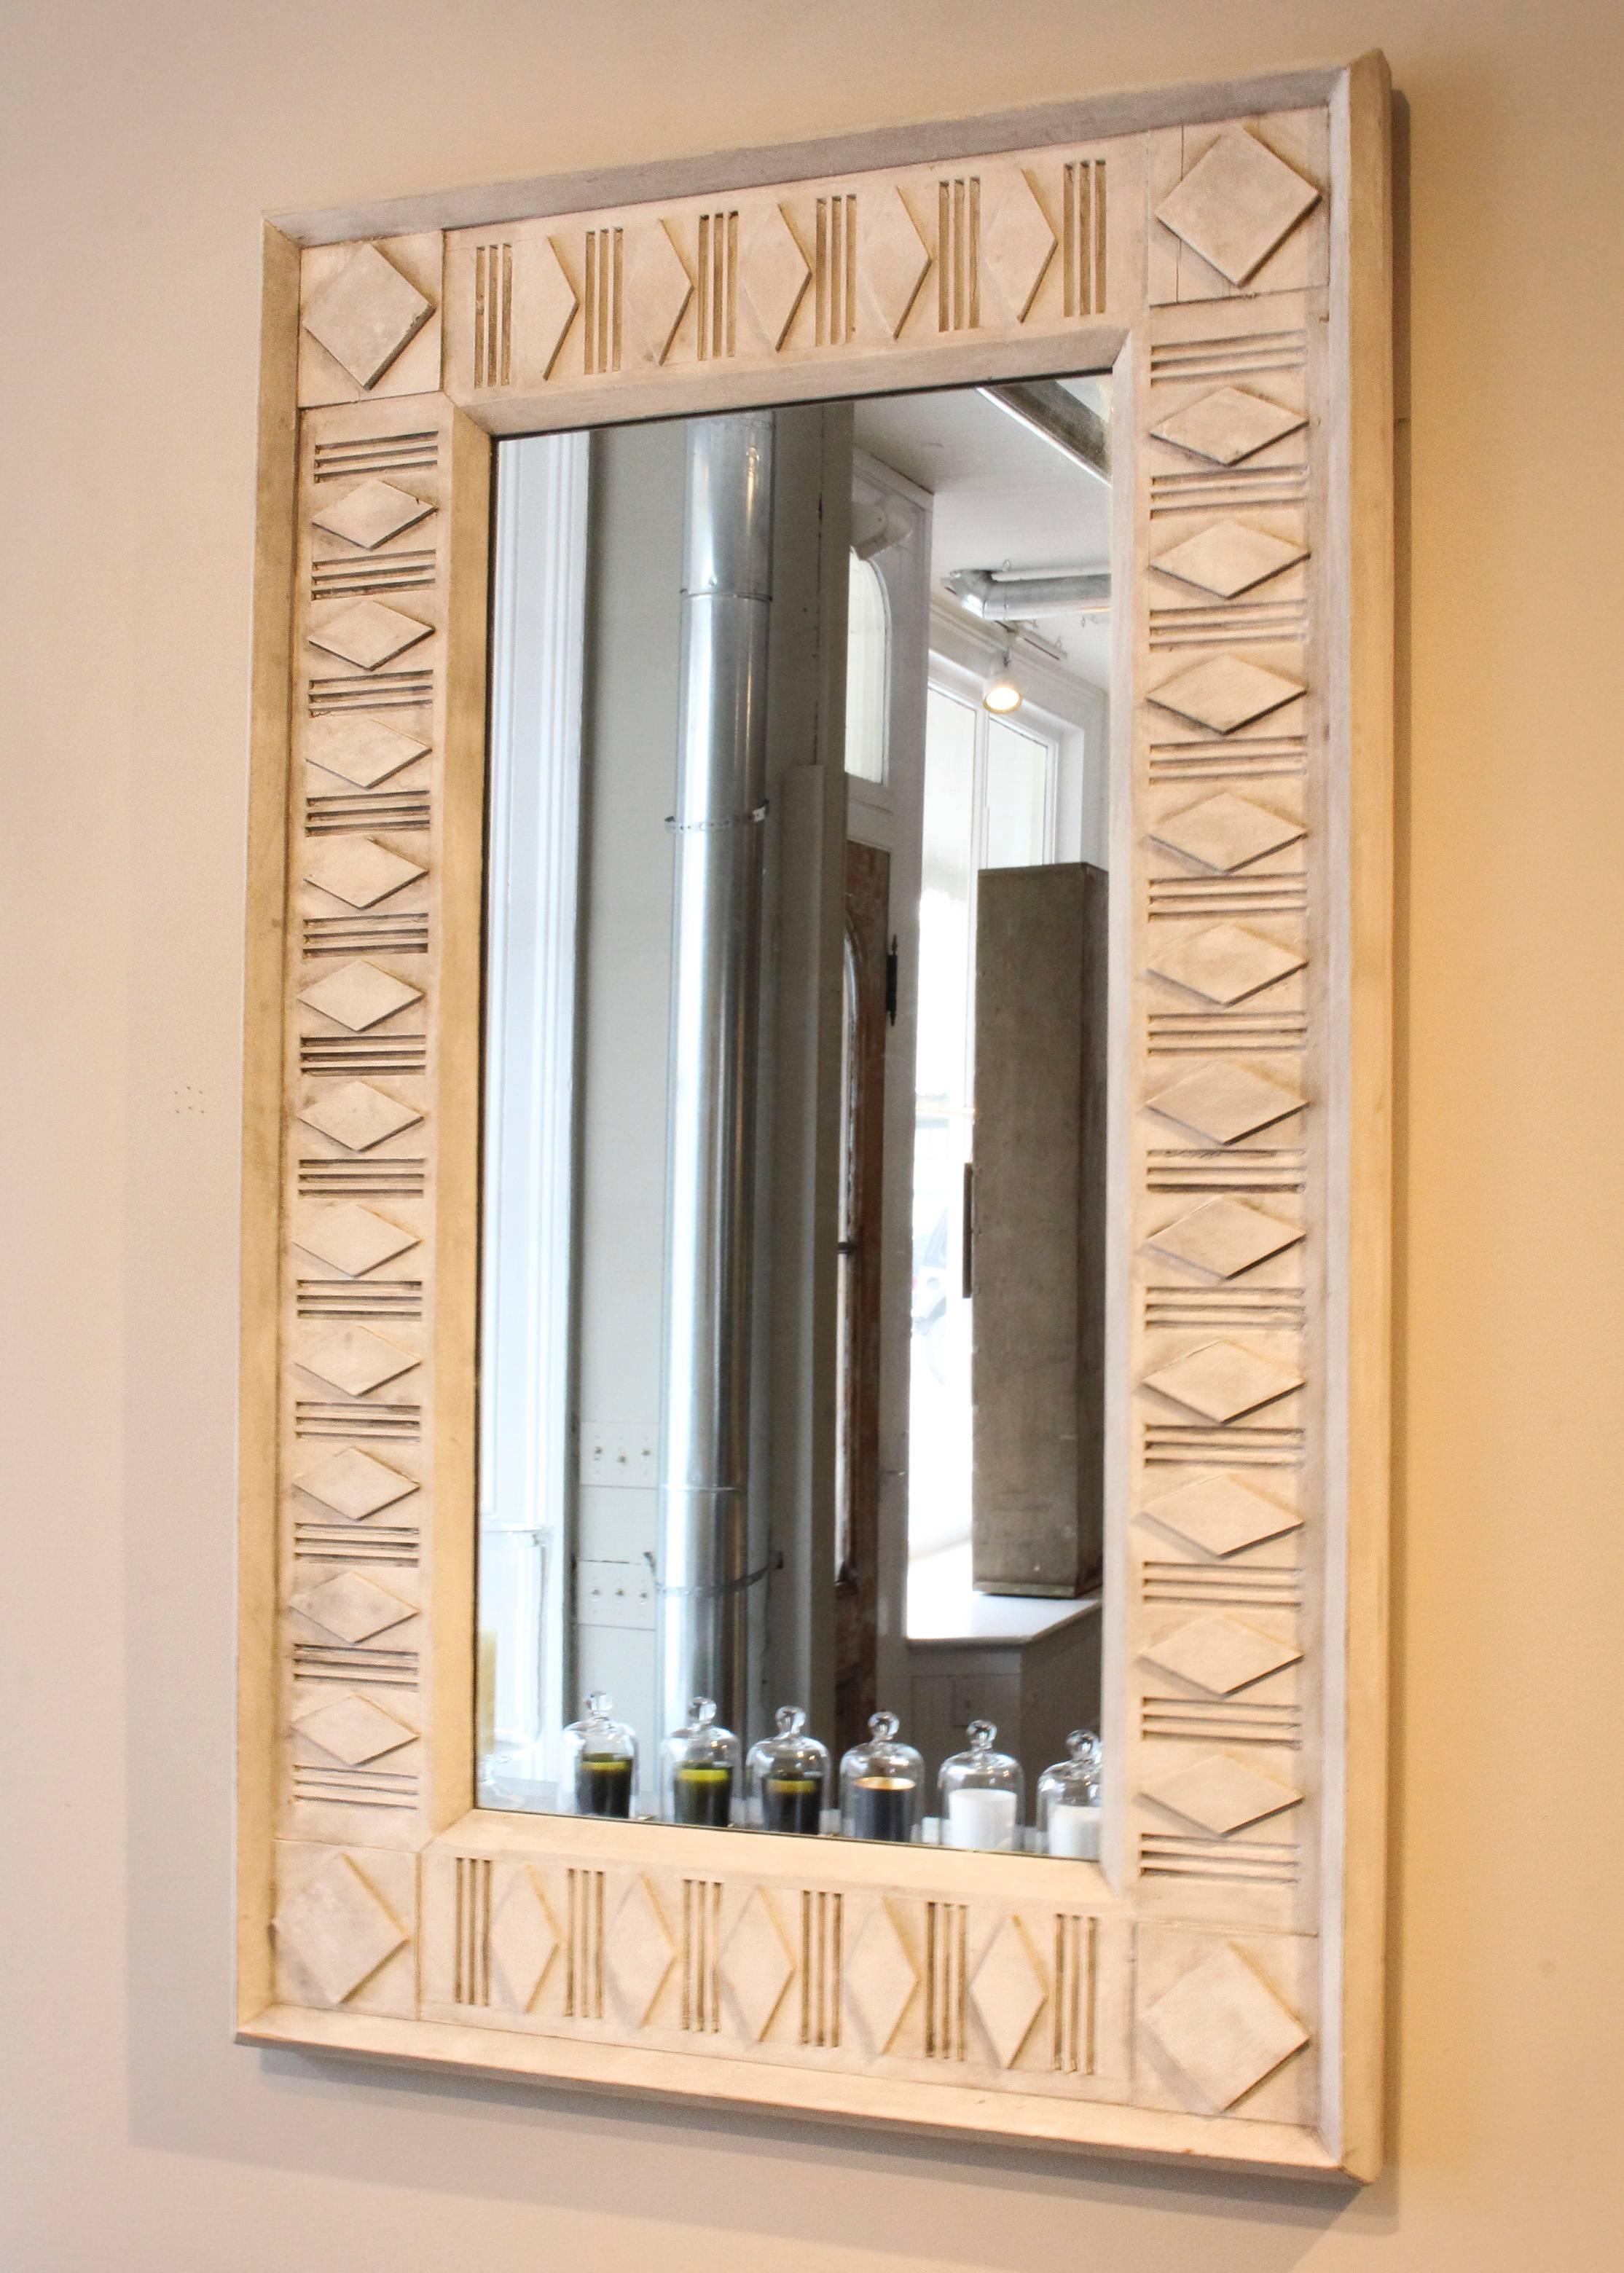 Architectural framed decorative mirror, 21st century, in reclaimed wood refreshed with oyster paint.